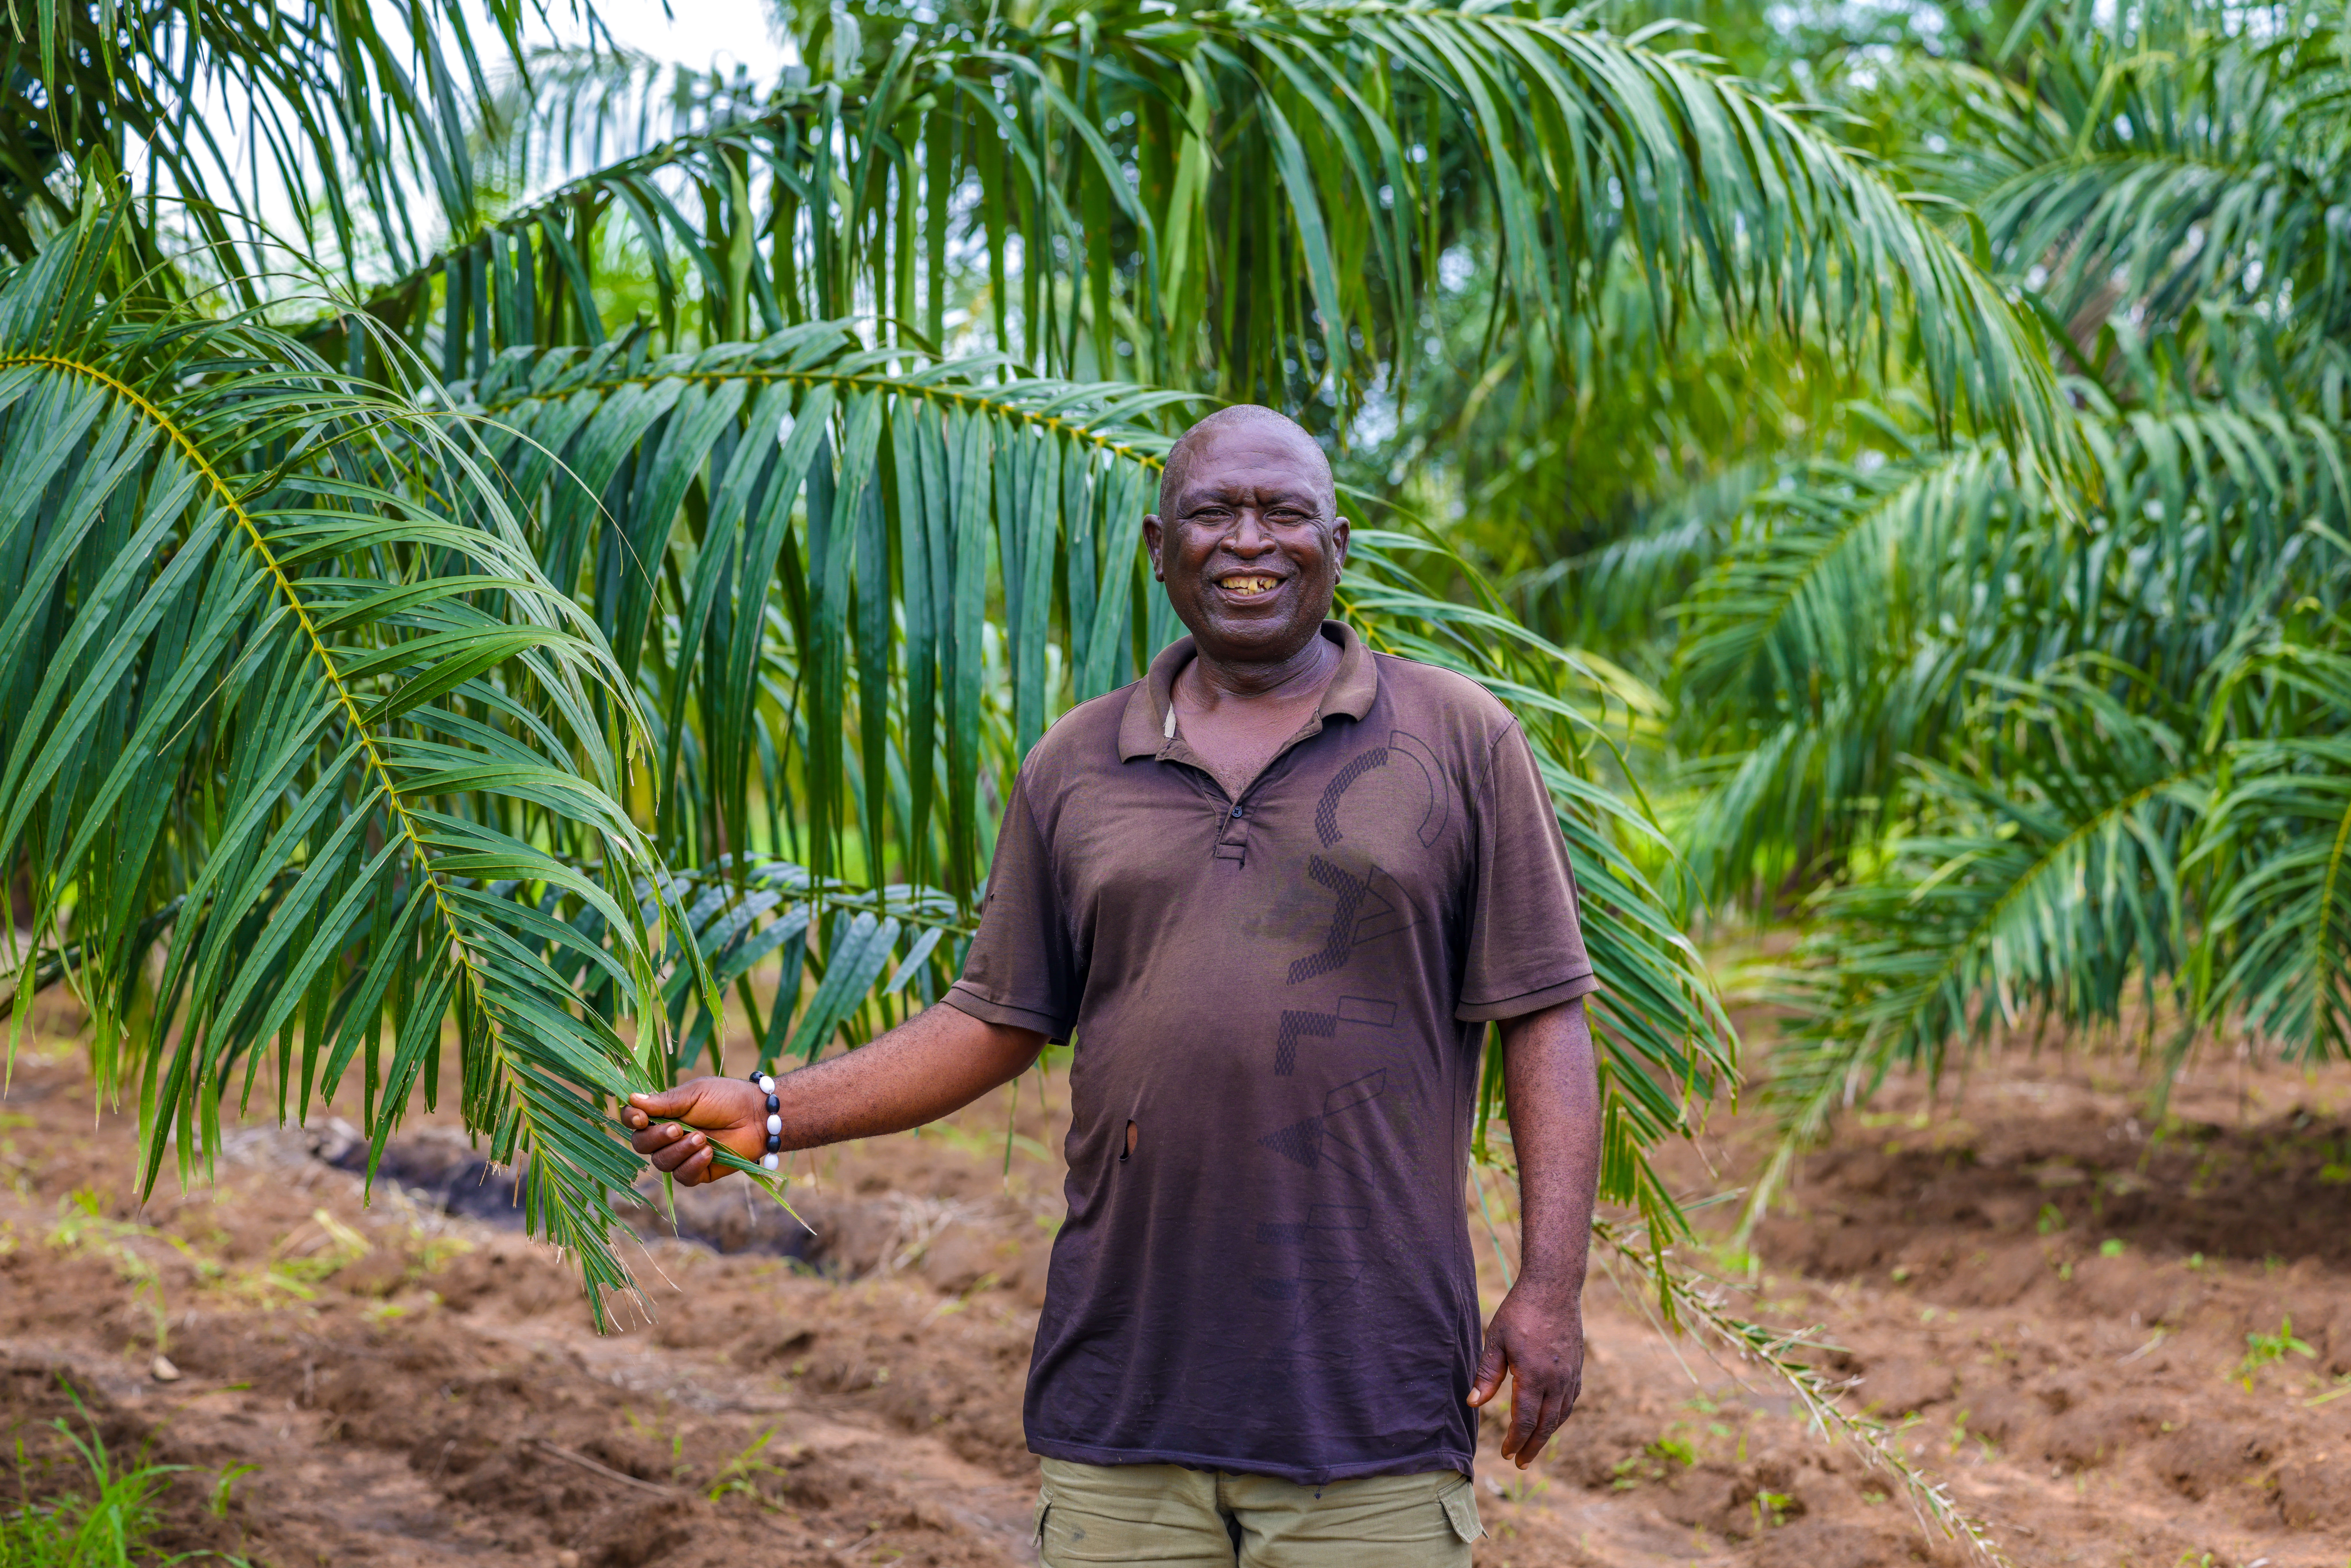 Gber Upa, a farmer from Mbagir village in Benue State.